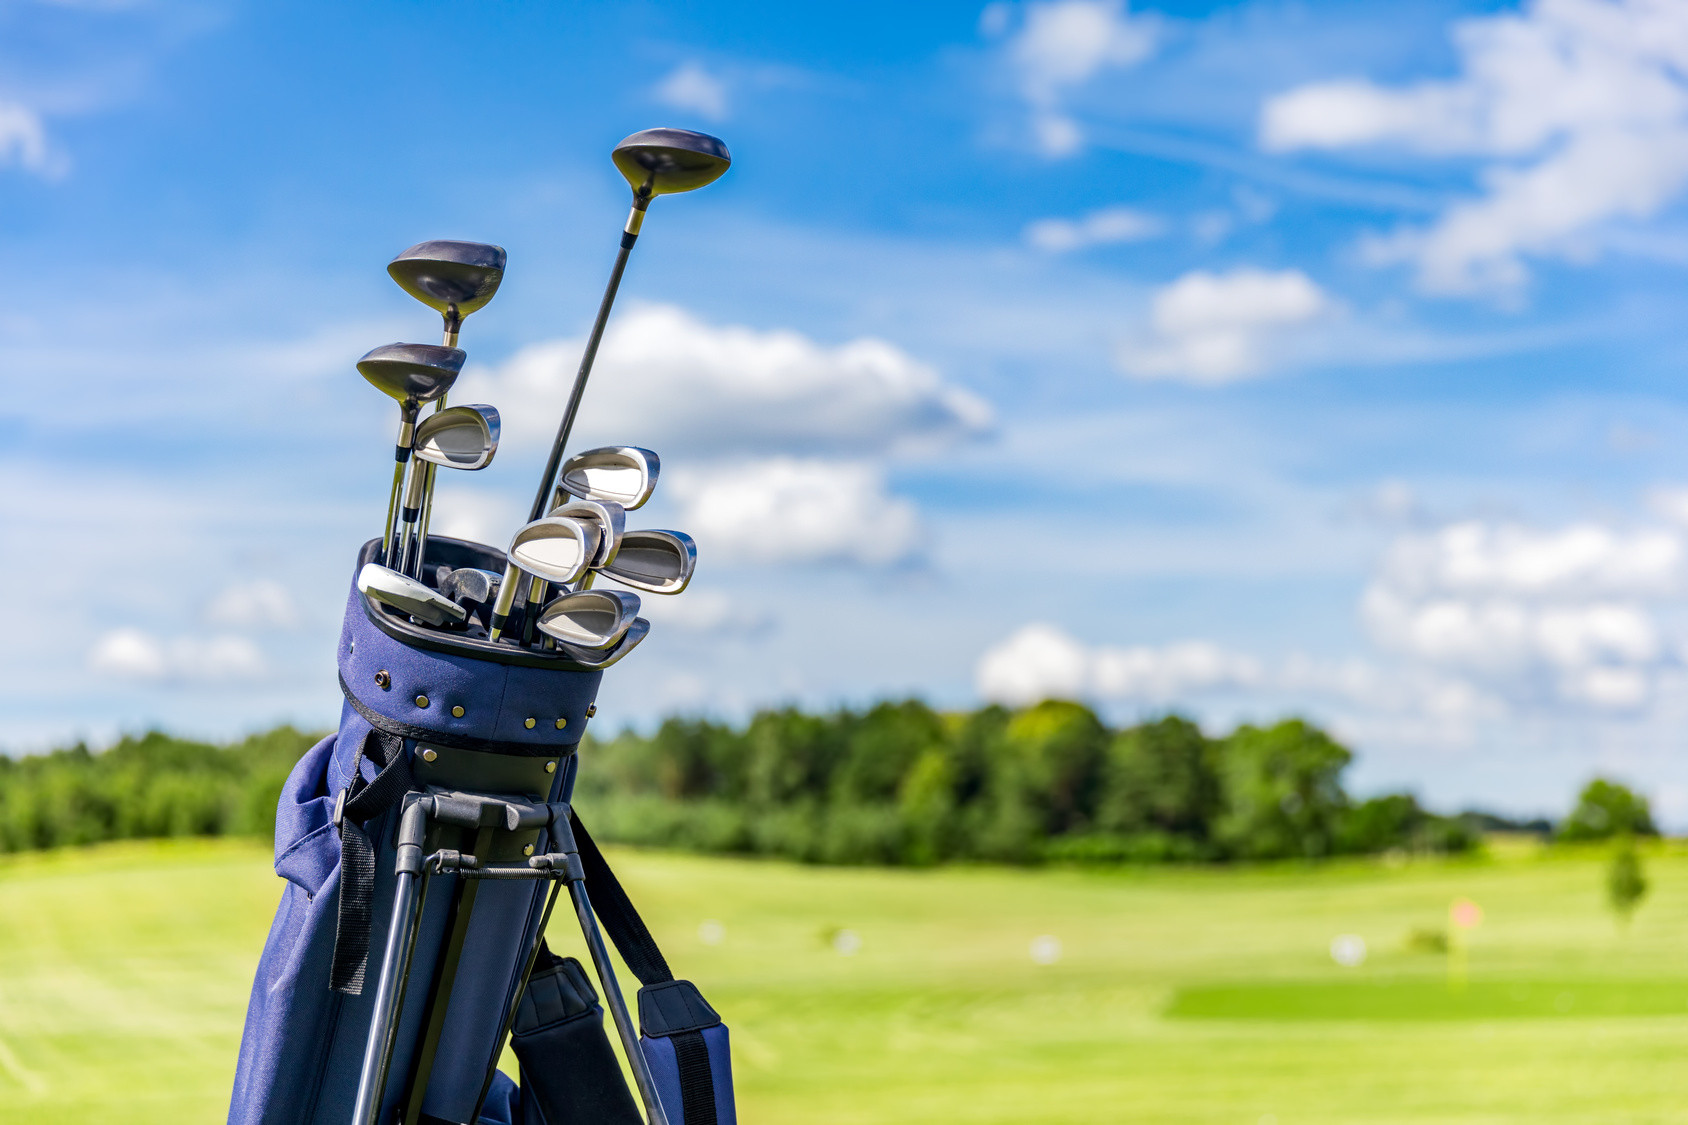 How Many Clubs Does A Set Of Golf Clubs Have? How Much Is The Price?